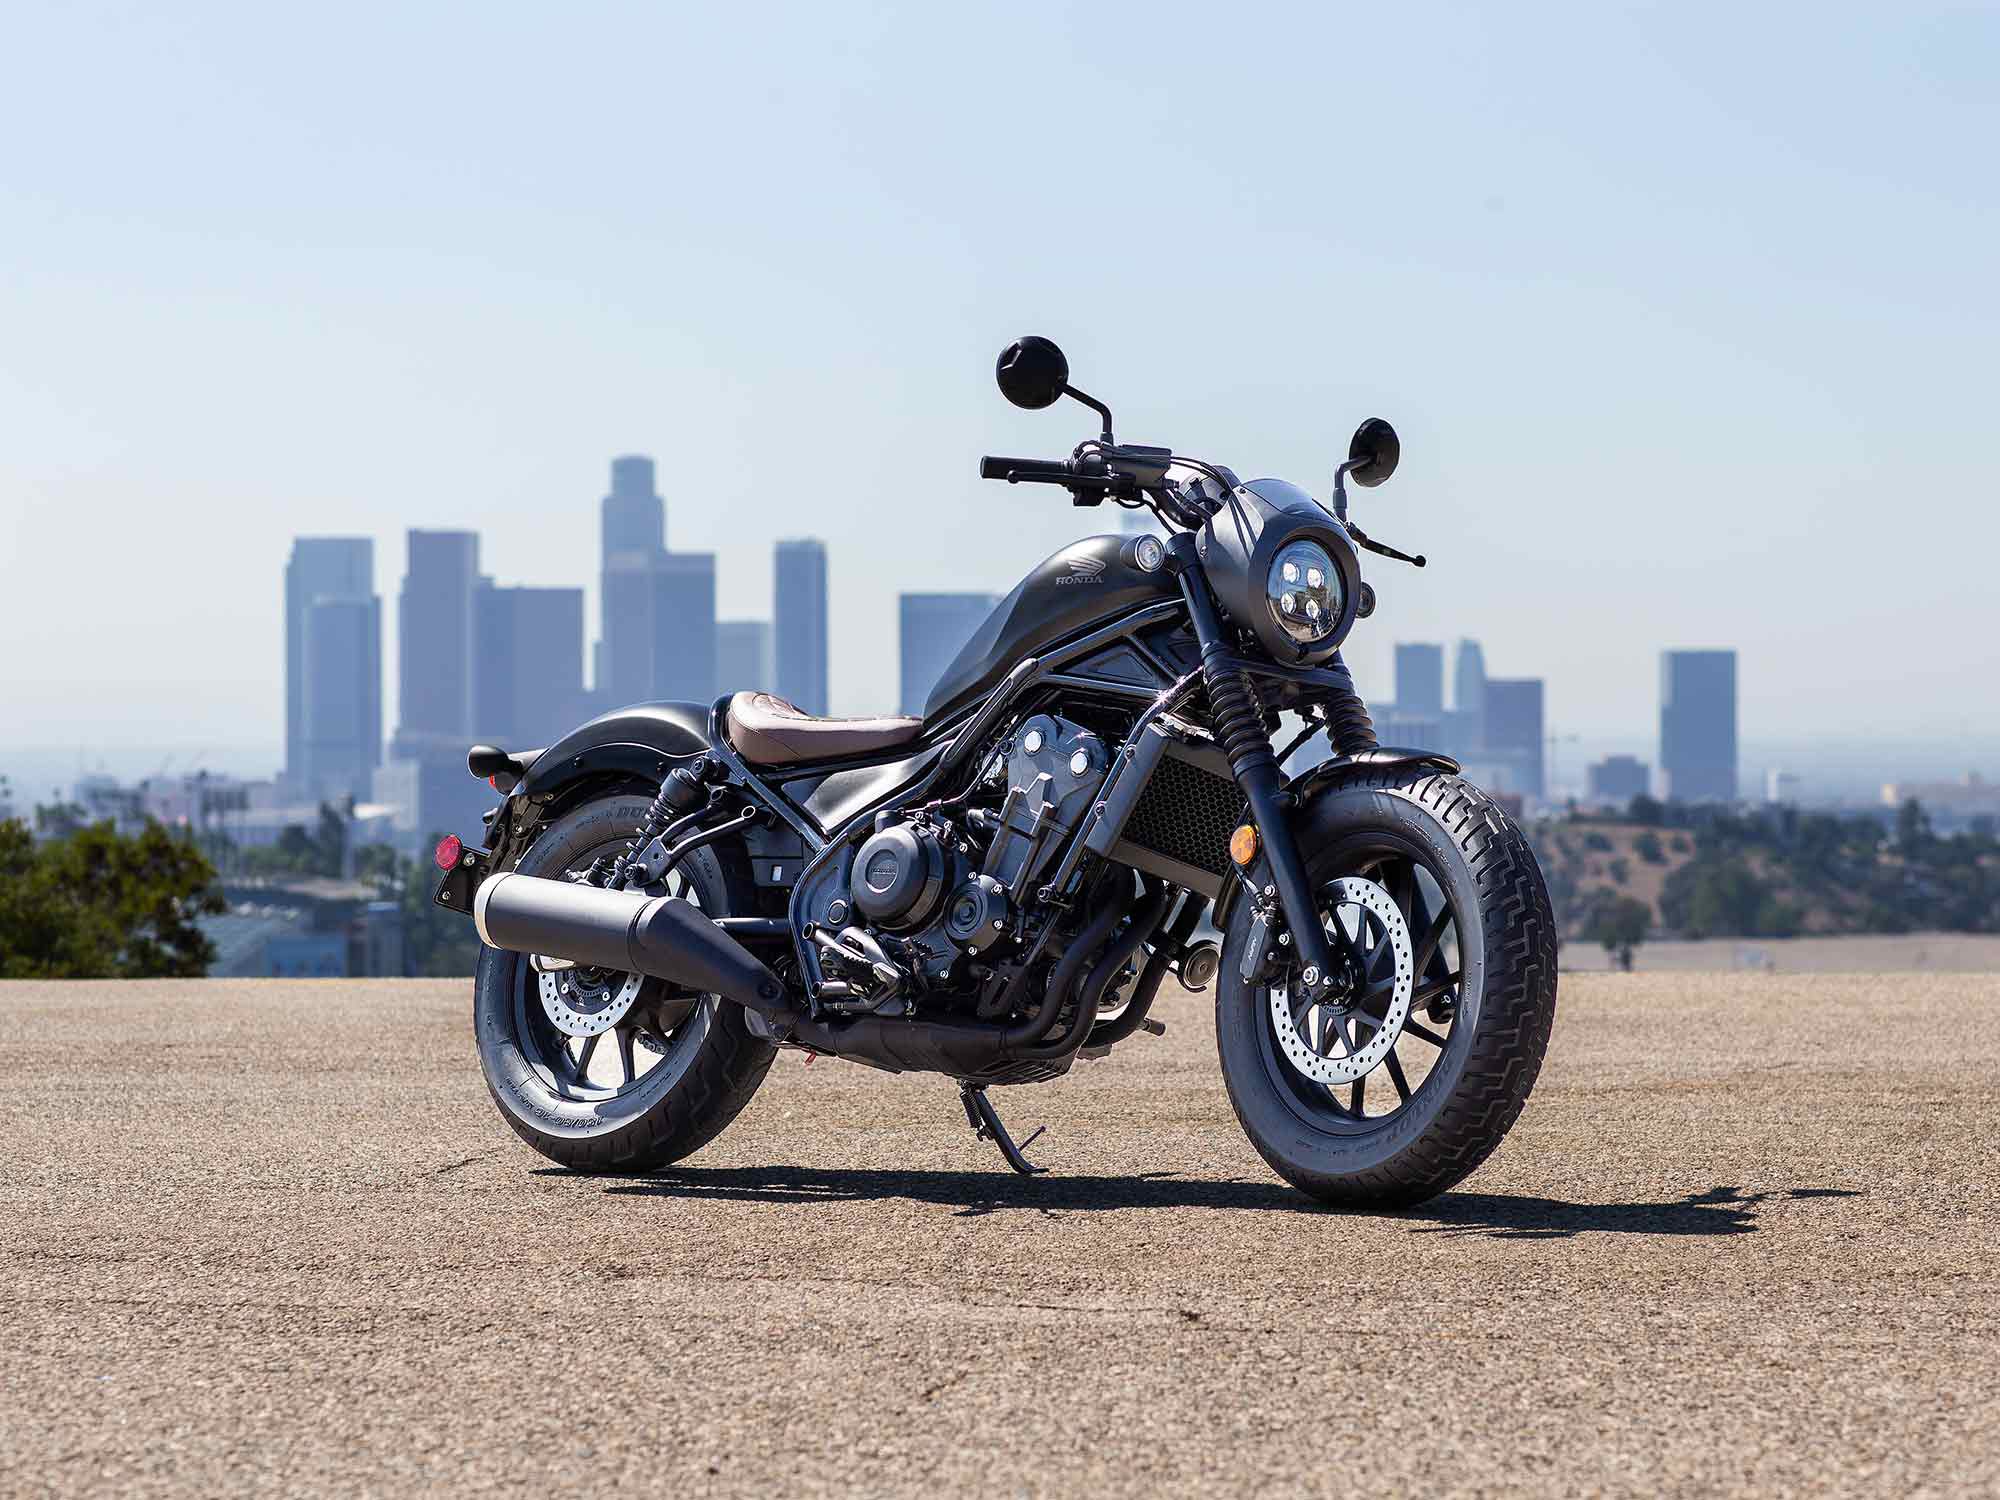 Honda’s Rebel 500 has a cool cruiser look and a versatile-enough power platform to handle any in-town duty.